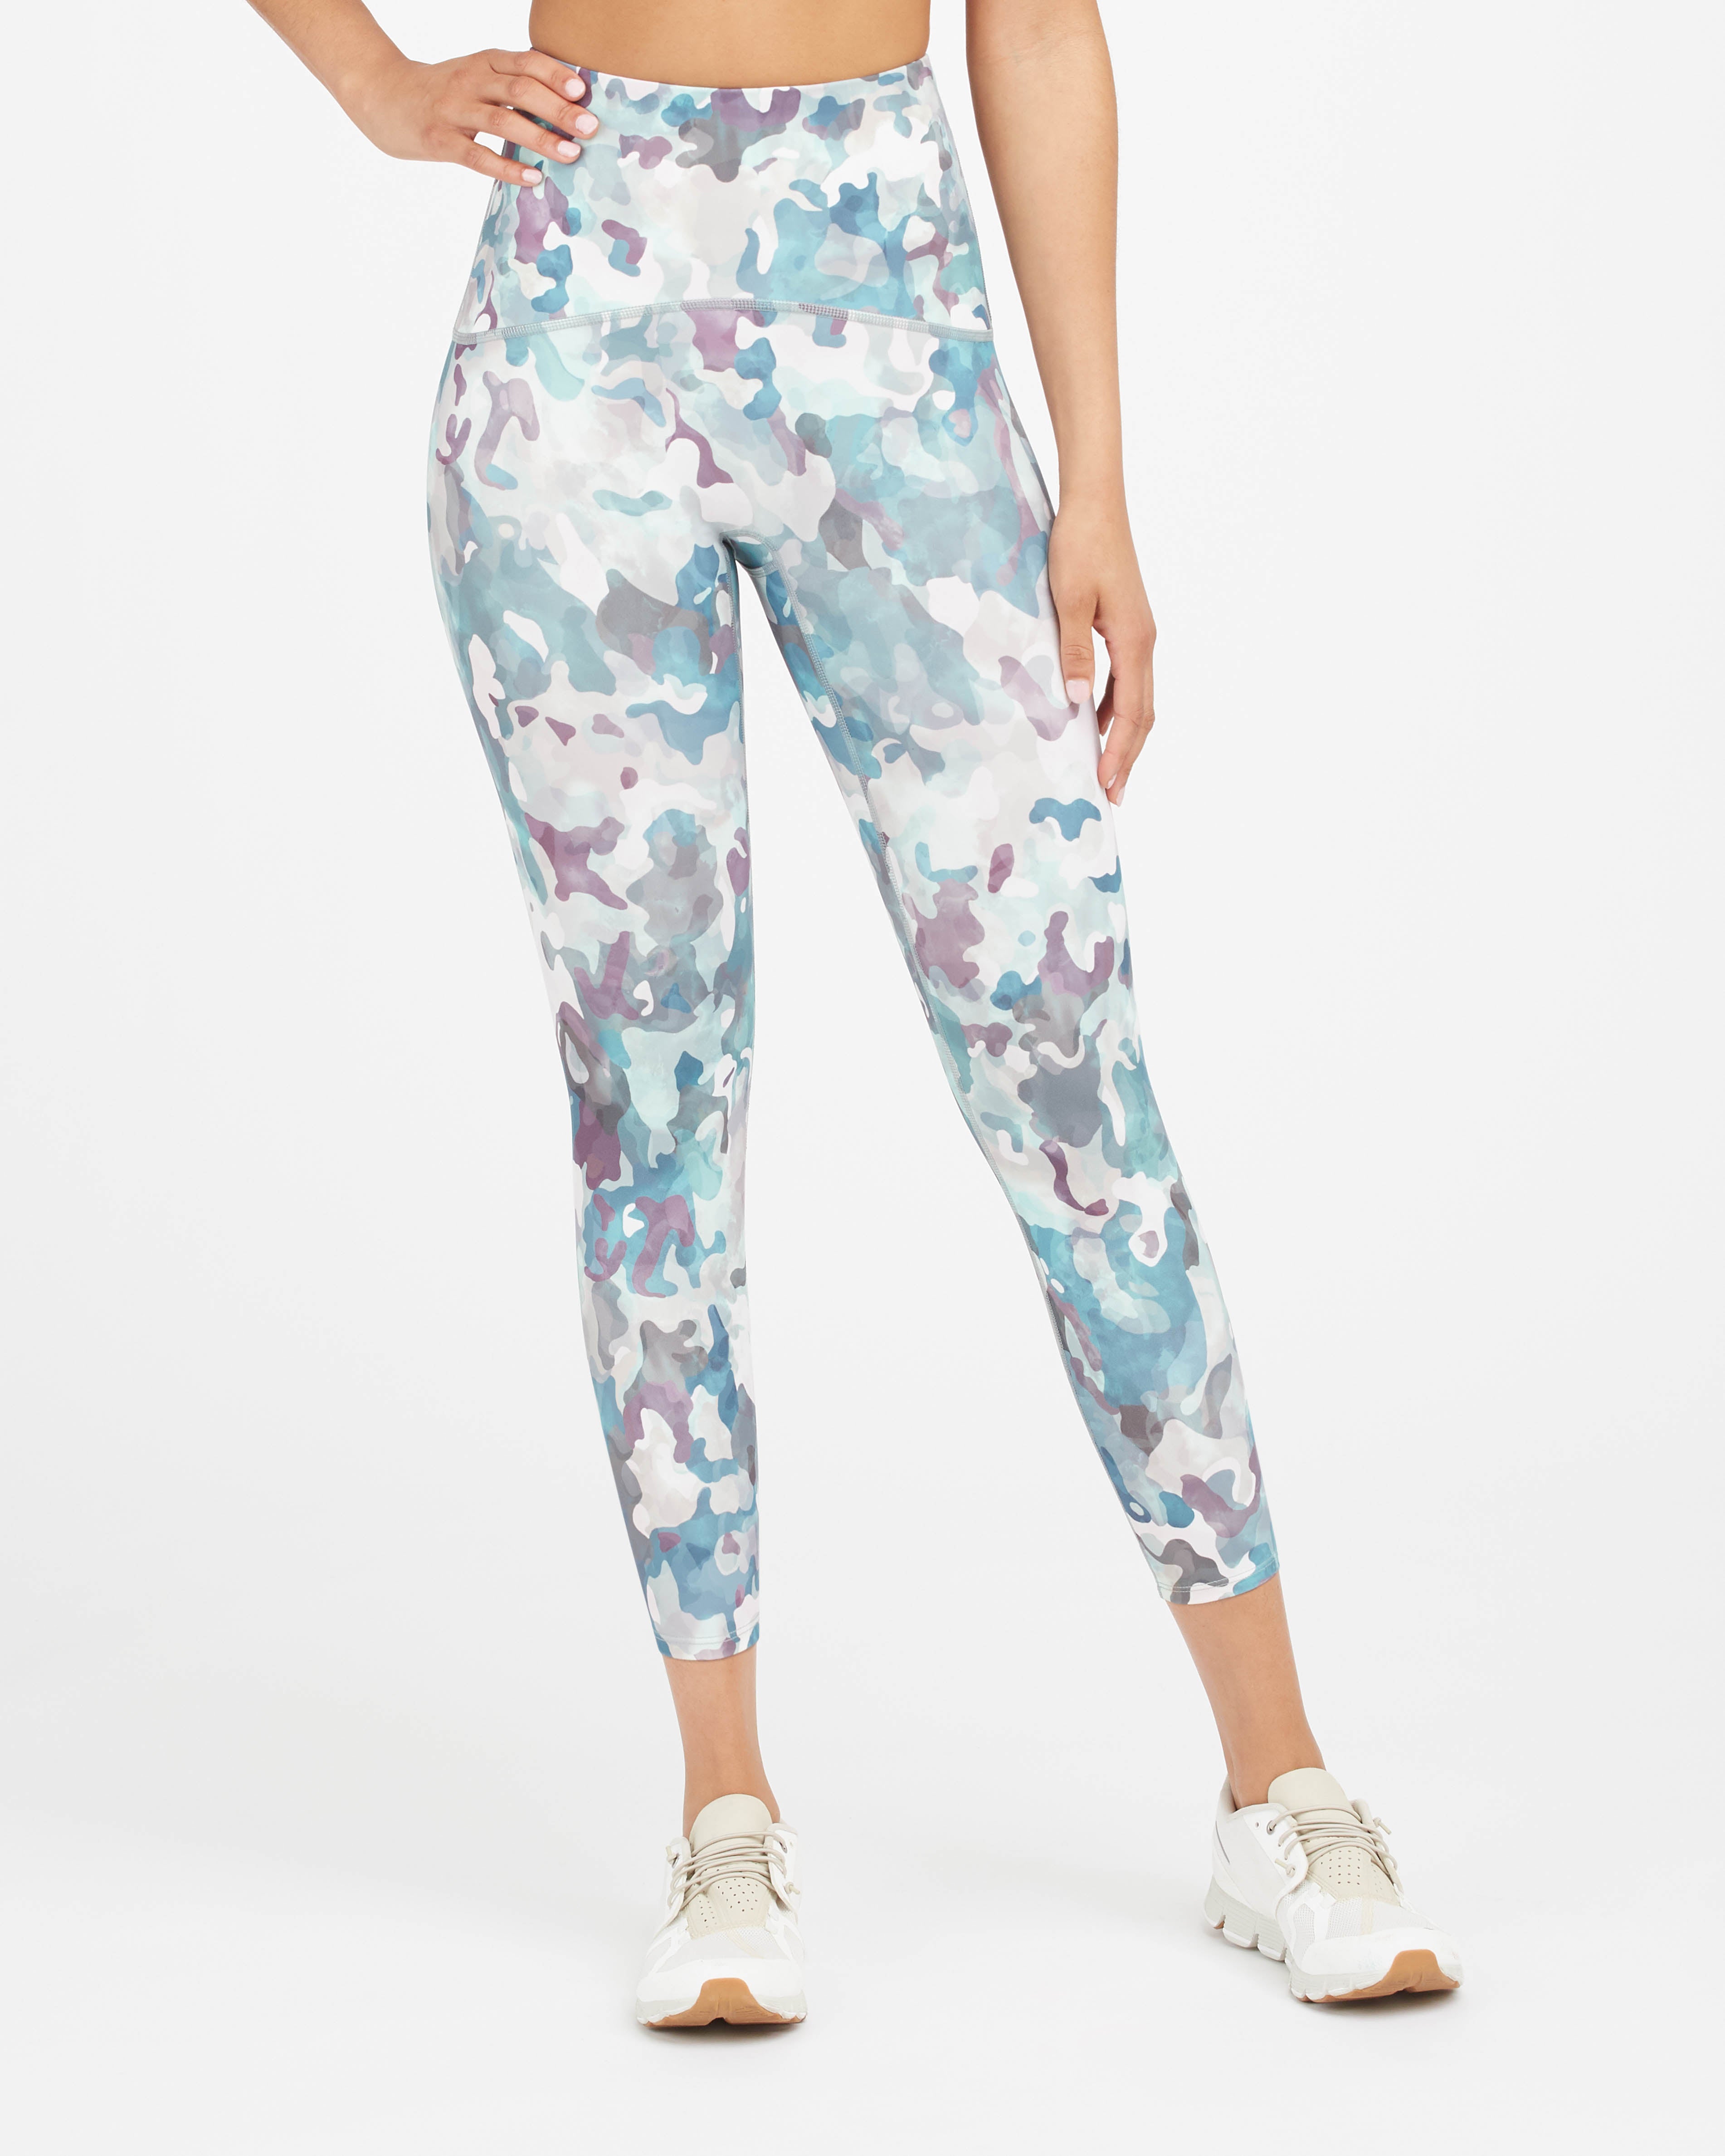 Spanx leggings womans small seamless camo print gym athletic workout casual  tigh - $43 - From Bea